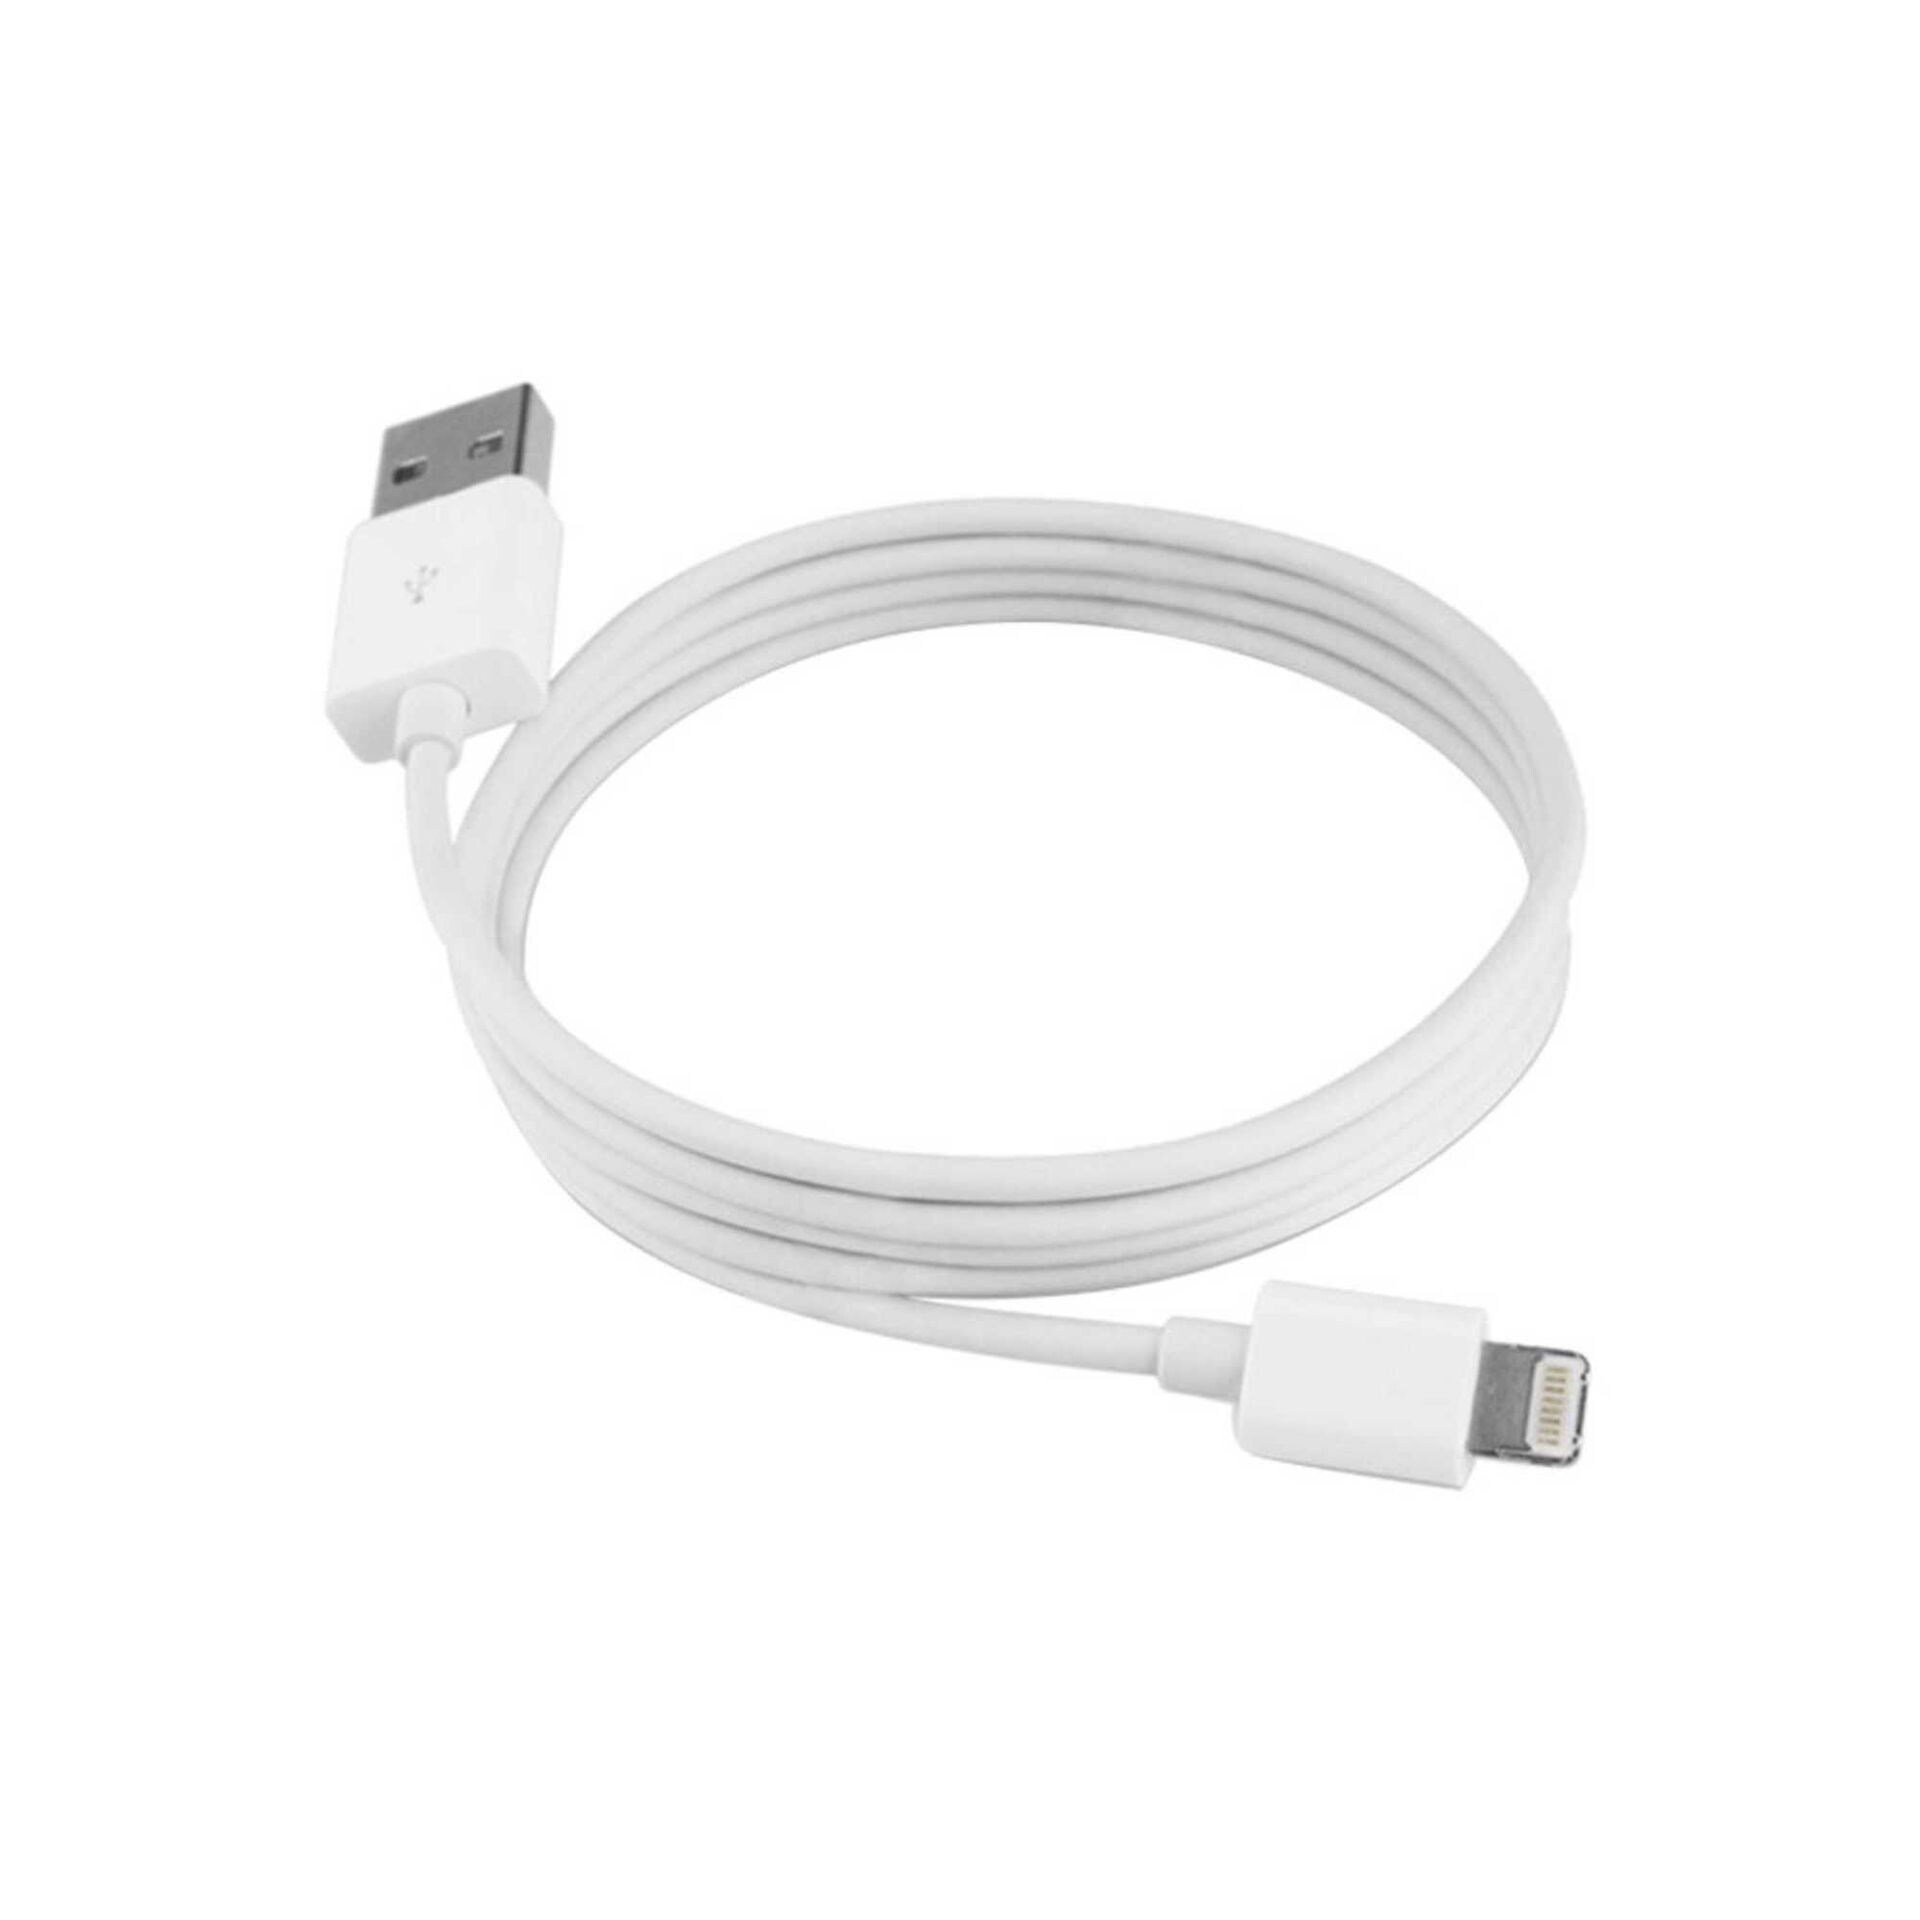 Rkn Electronics Lightning Data Sync Charging Cable, White, 1M